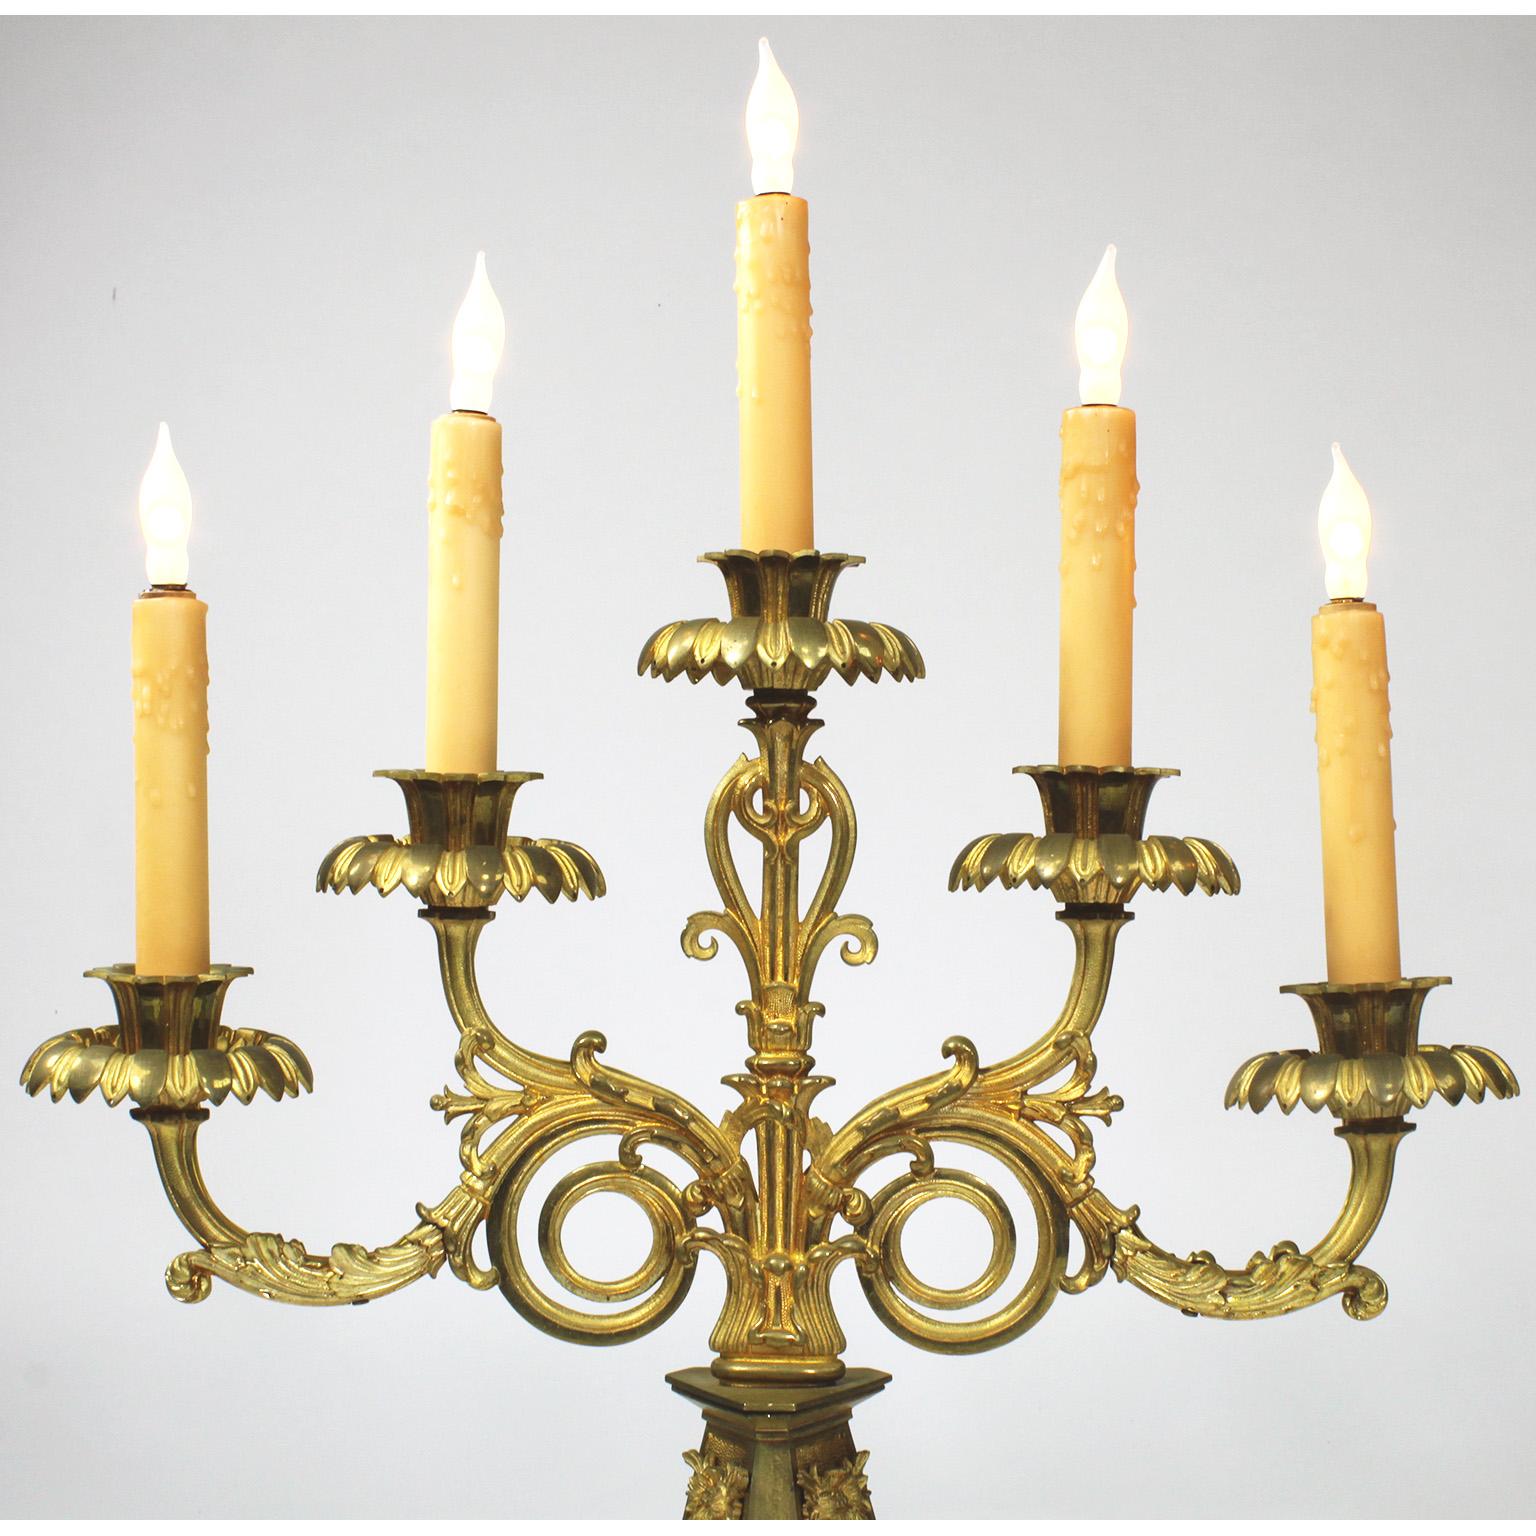 Gothic Revival Pr. French 19th Century Gothic-Neoclassical Style 5-Light Gilt-Bronze Candelabra For Sale